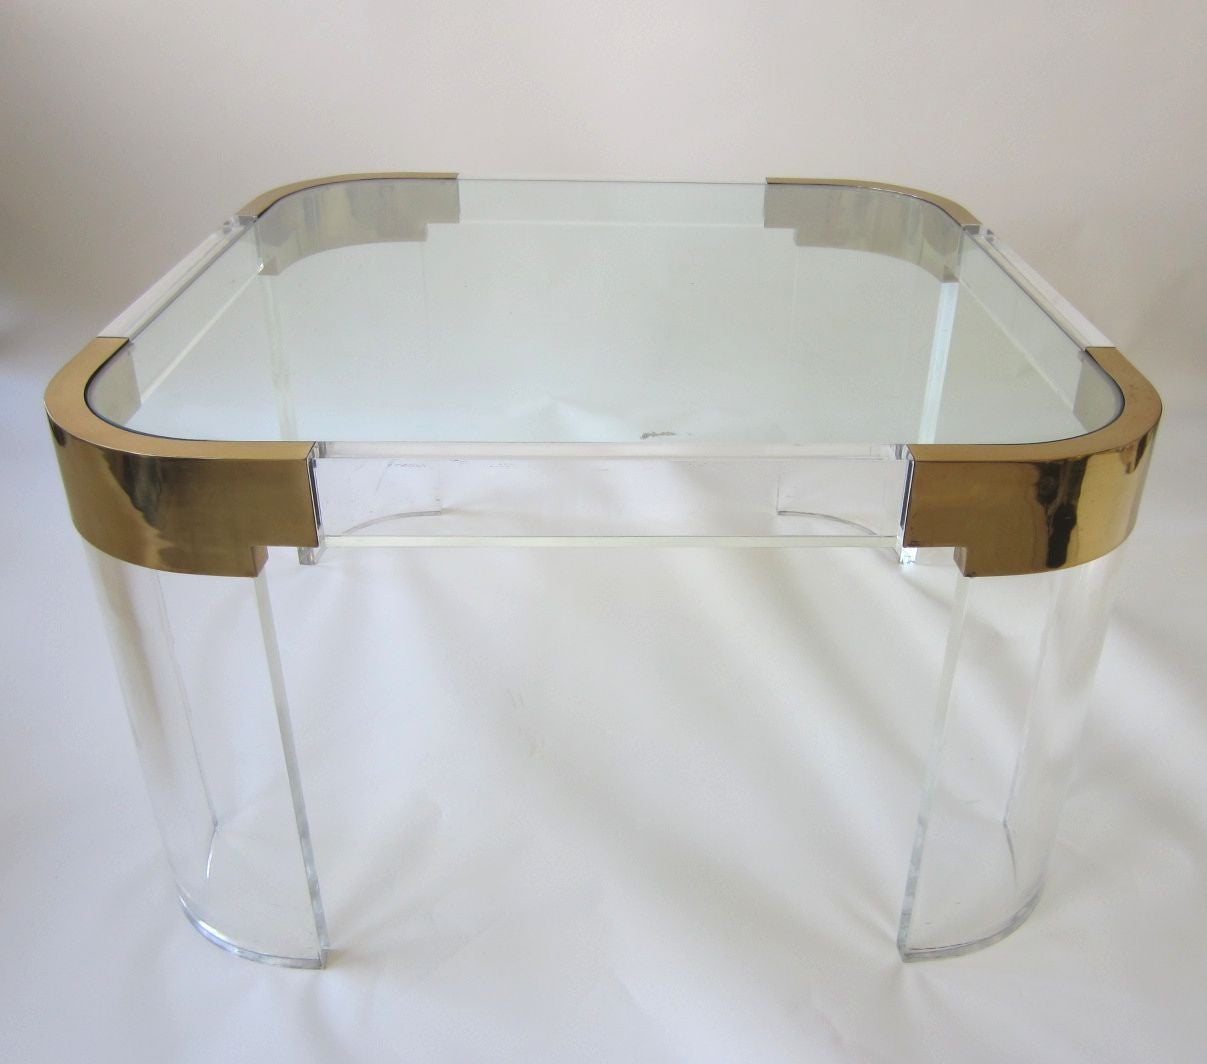 Designed by Charles Hollis Jones this huge vintage table is constructed of thick Lucite legs and side rails with round brass corners and a thick glass top.
A beautiful piece of functional art furniture in exceptional clean condition.